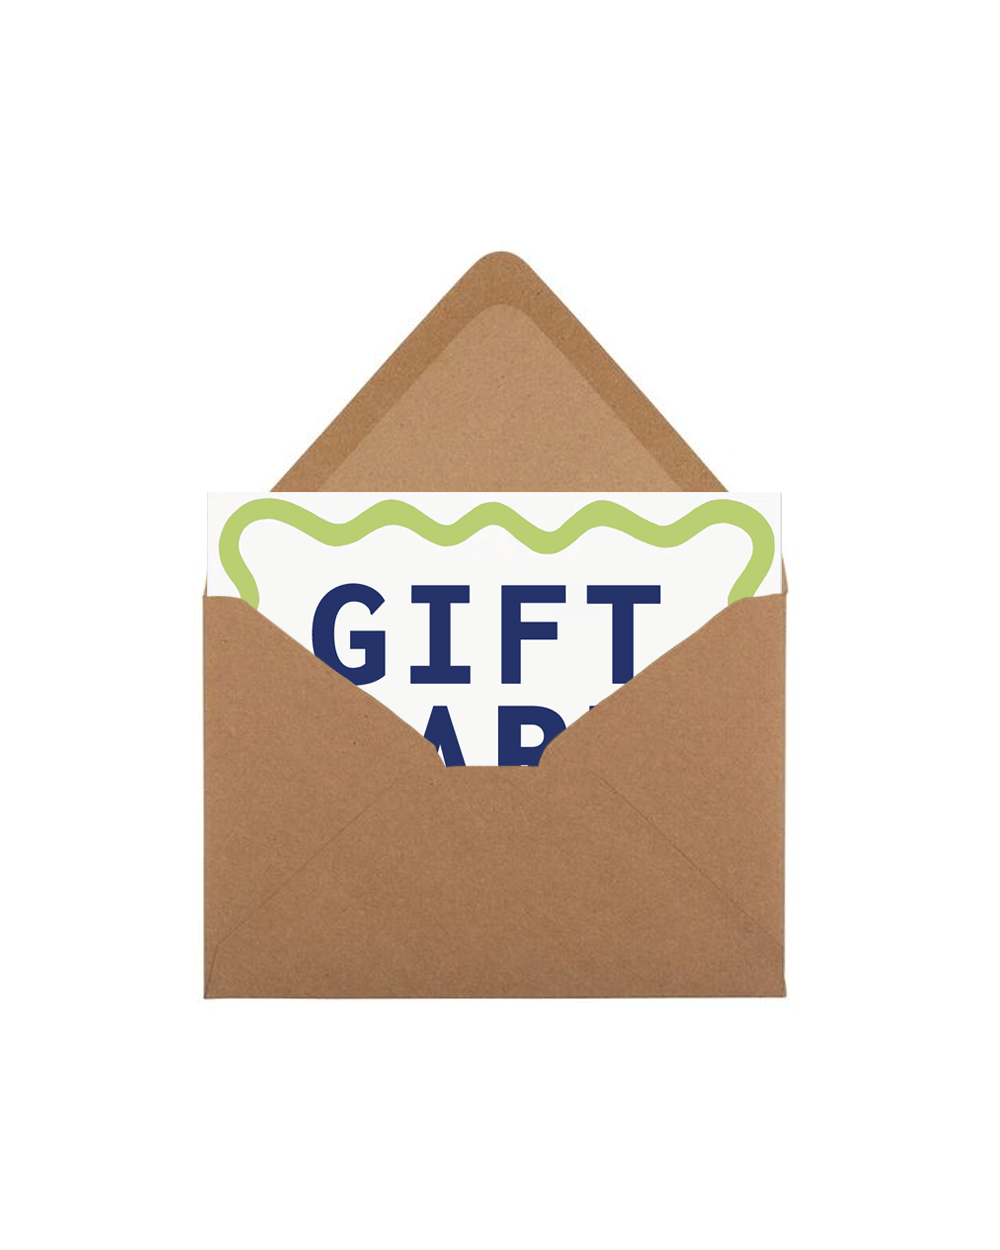 Opening gift card animation